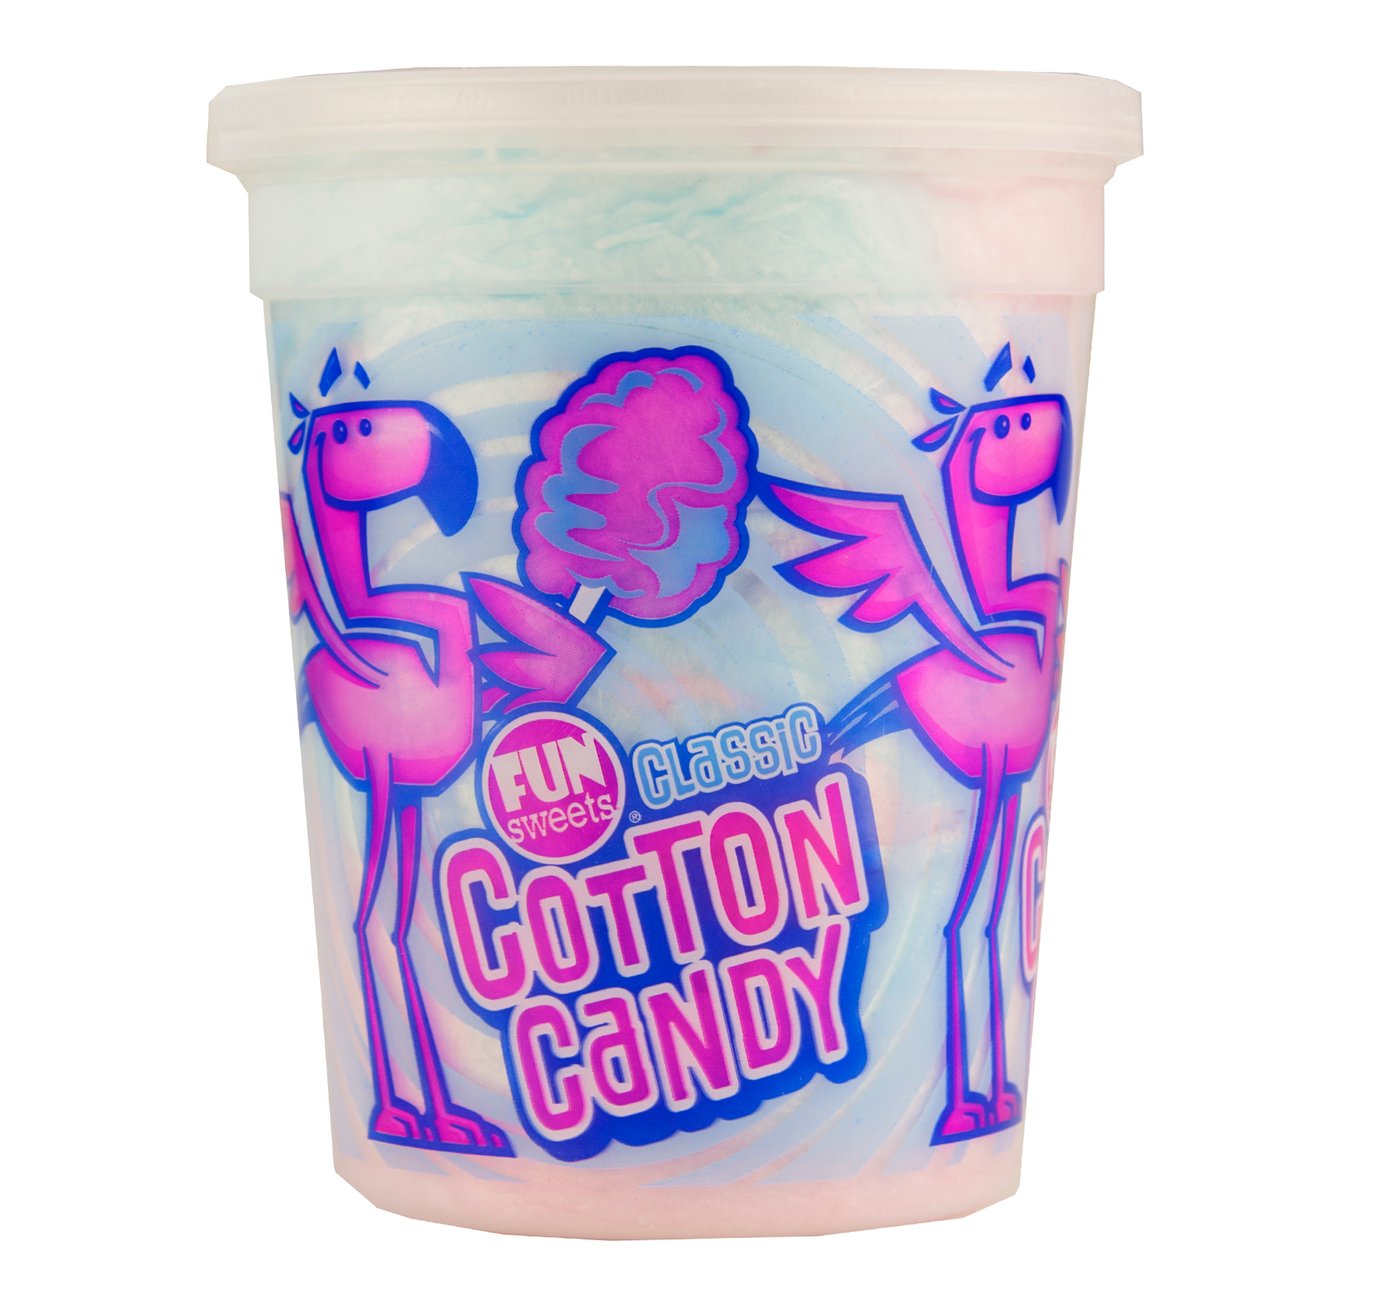 Cotton Candy image zoom